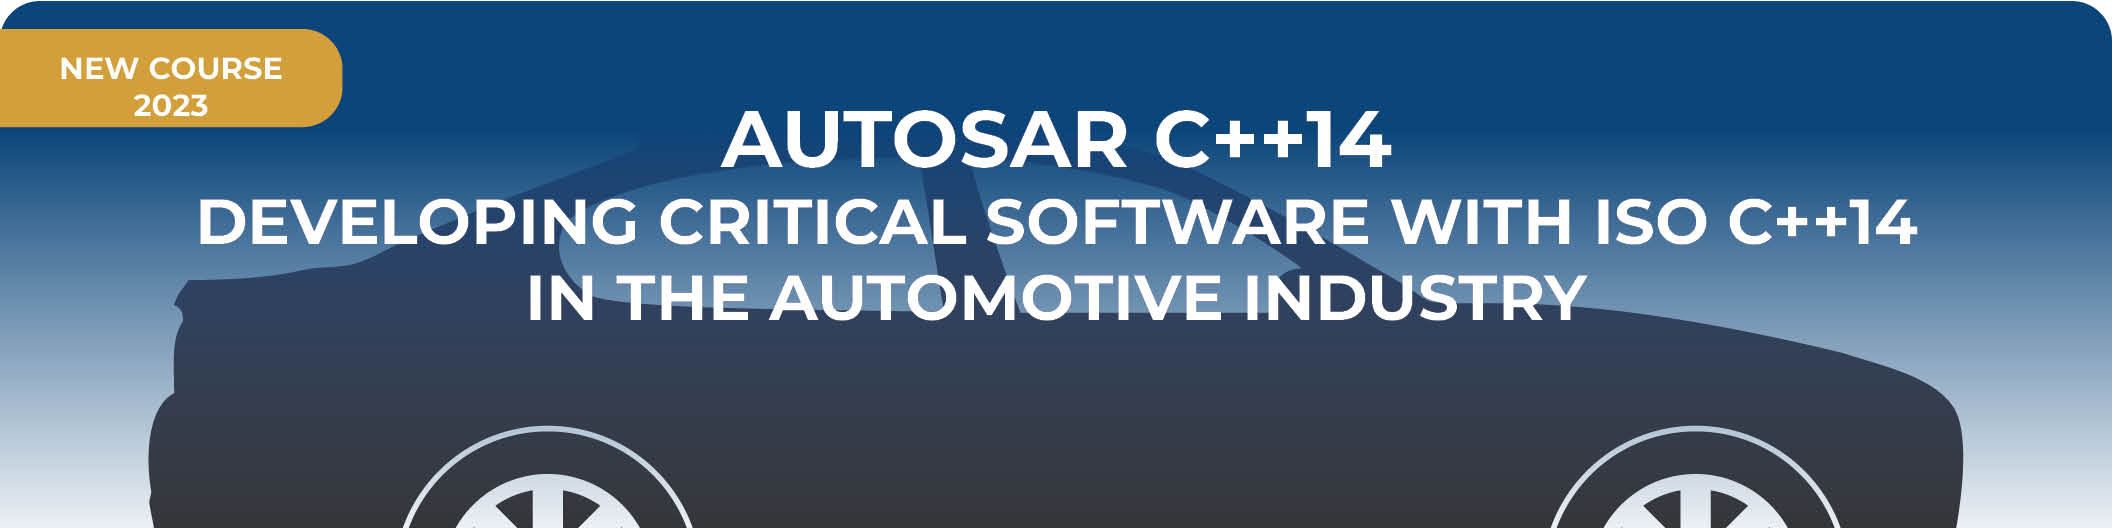 AUTOSAR C++14 - DEVELOPING CRITICAL SOFTWARE WITH ISO C++14 IN THE AUTOMOTIVE INDUSTRY